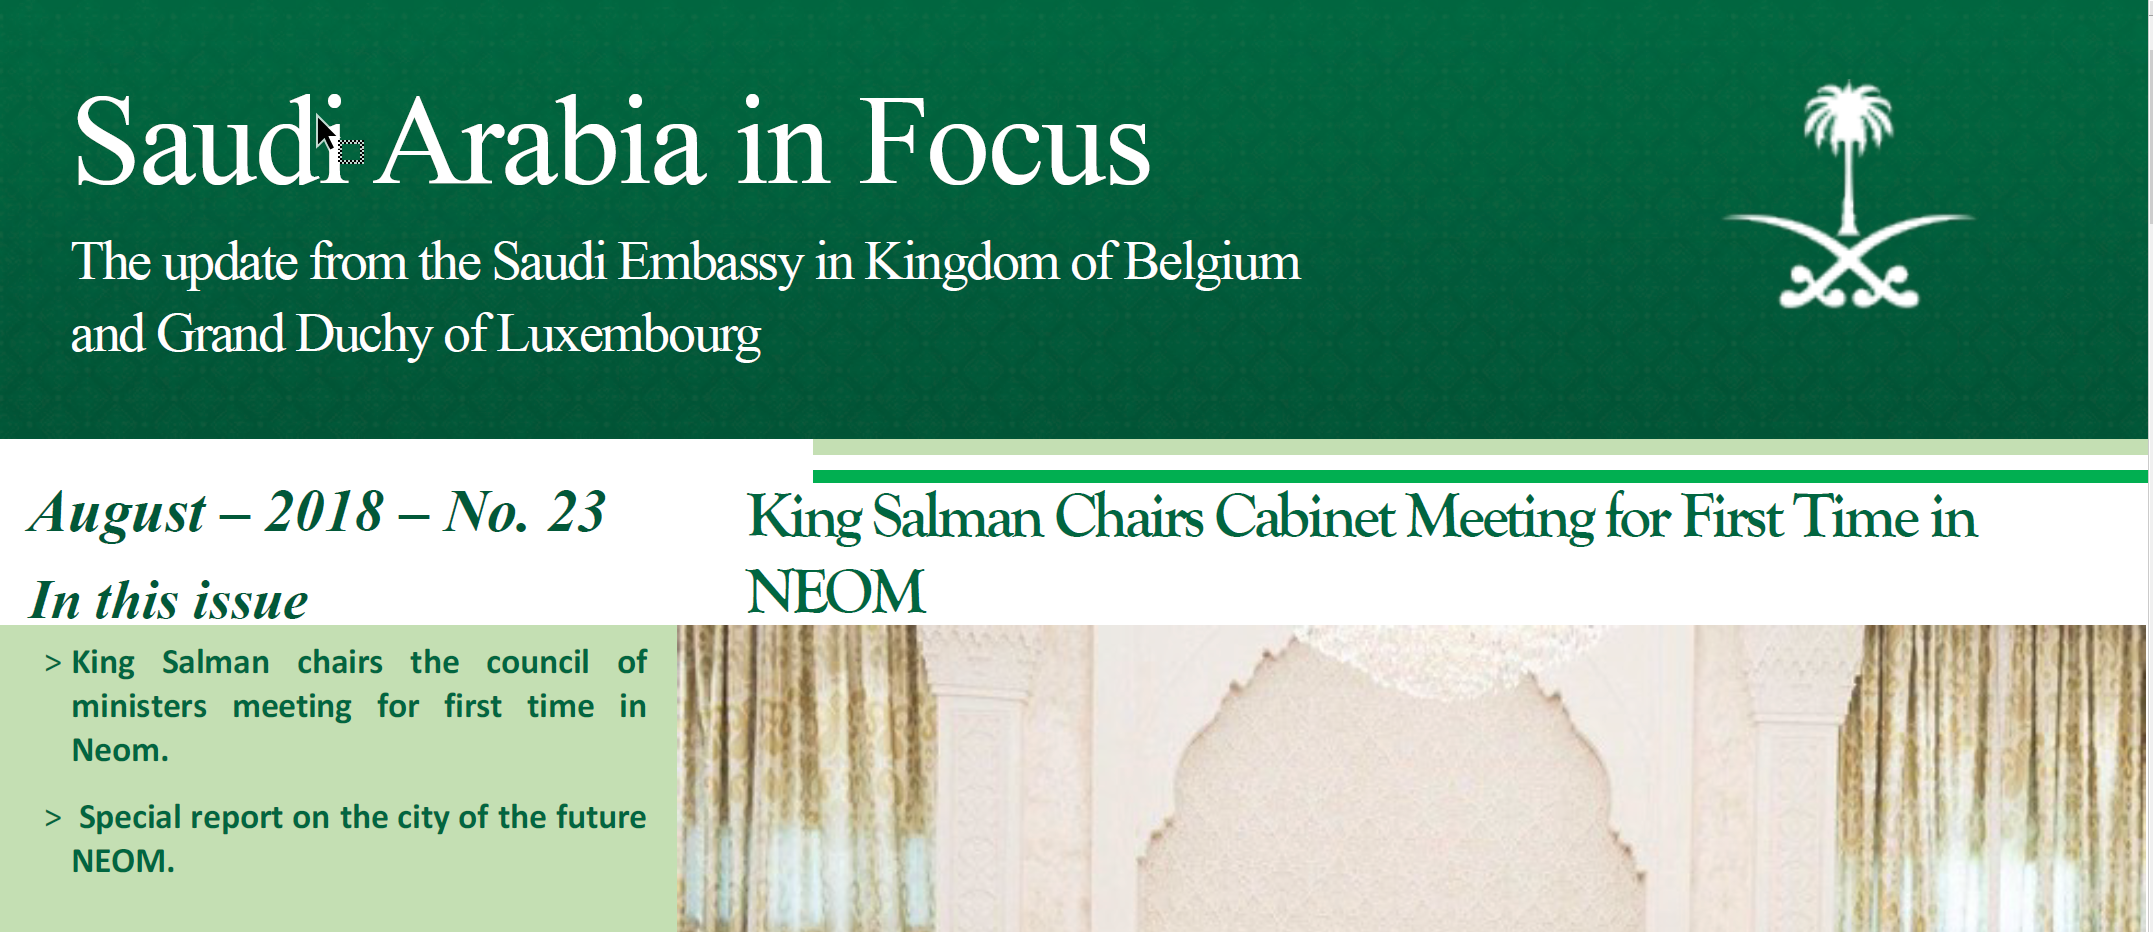 AUGUST EDITION OF THE SAUDI ARABIA IN FOCUS NEWSLETTER